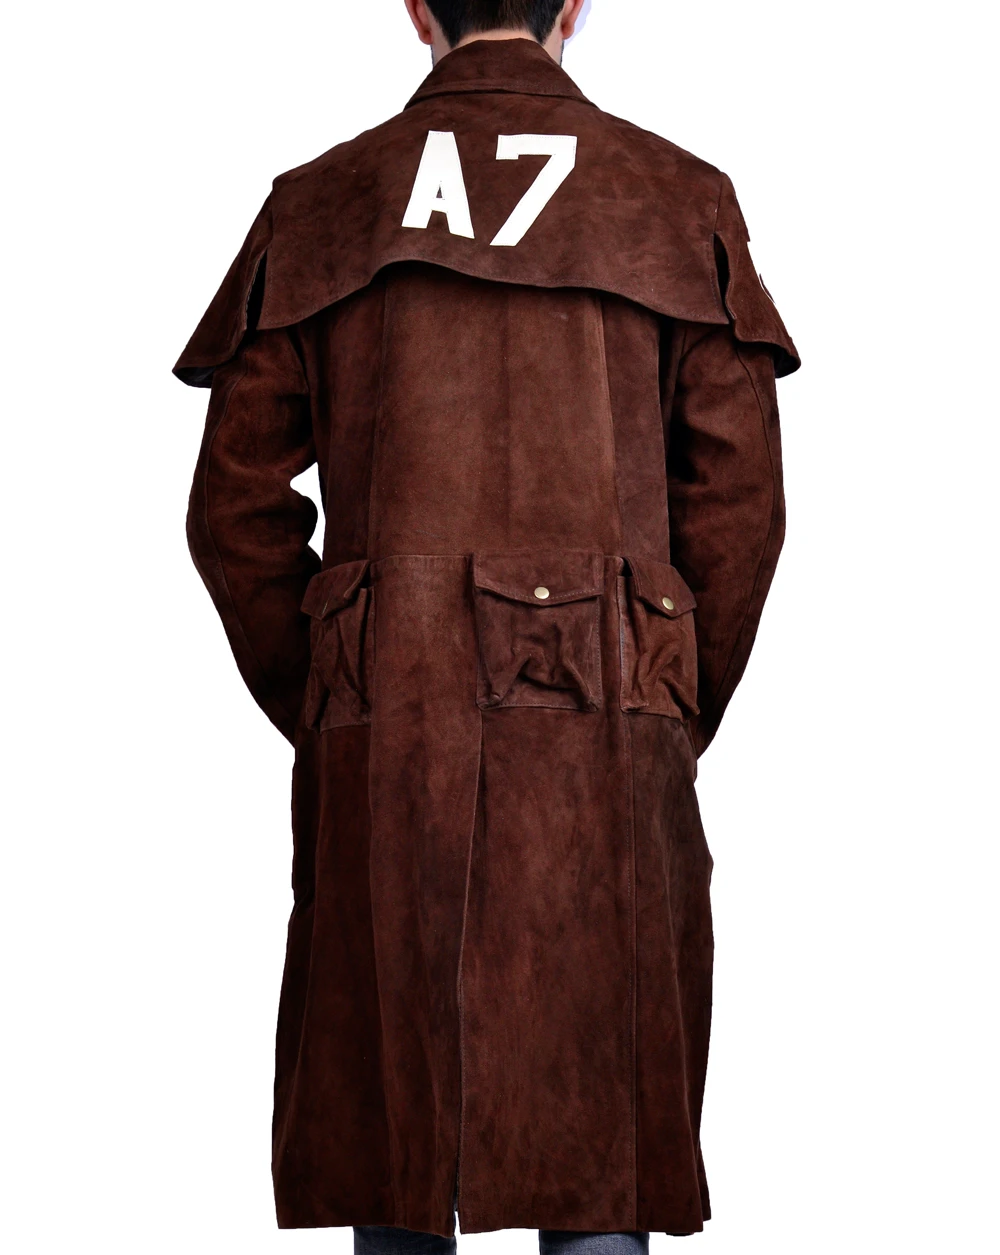 A7-Coat Destructive A7 Suede Leather Duster Trench Coat Brown